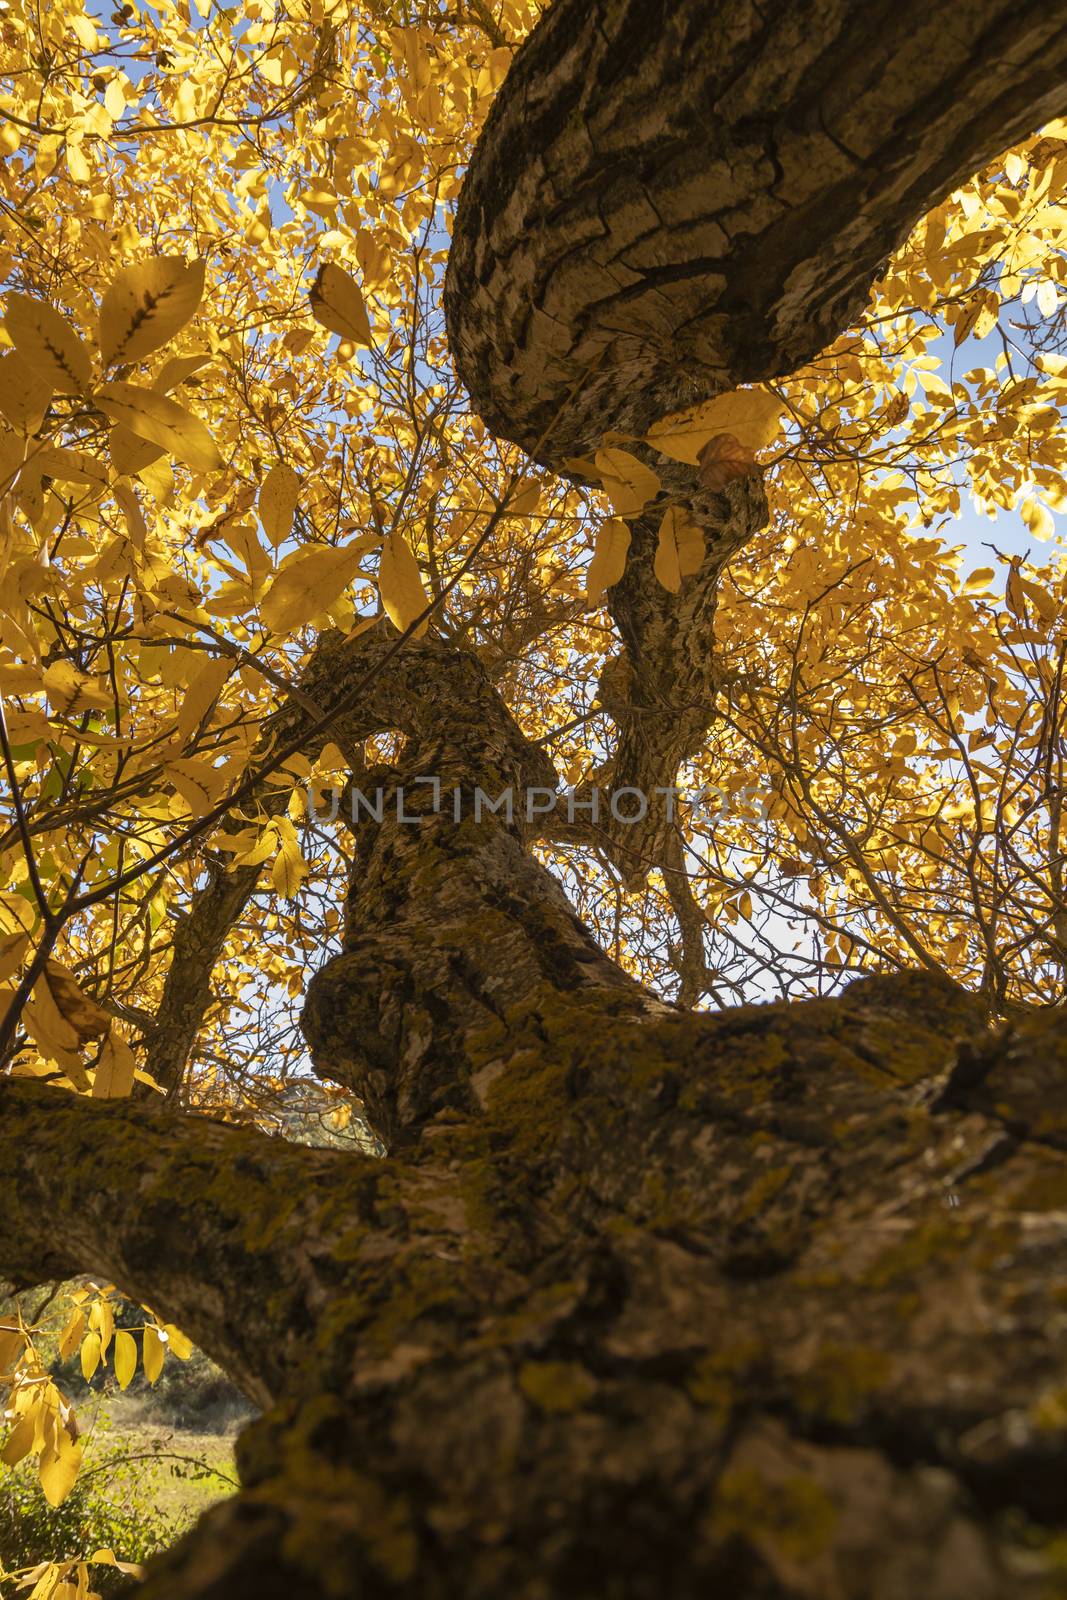 A beautiful walnut tree, dressed in autumn with yellow leaves, poses in silence among the sunny fields near the small town of Orés, in the Cinco Villas region, Zaragoza, Spain.